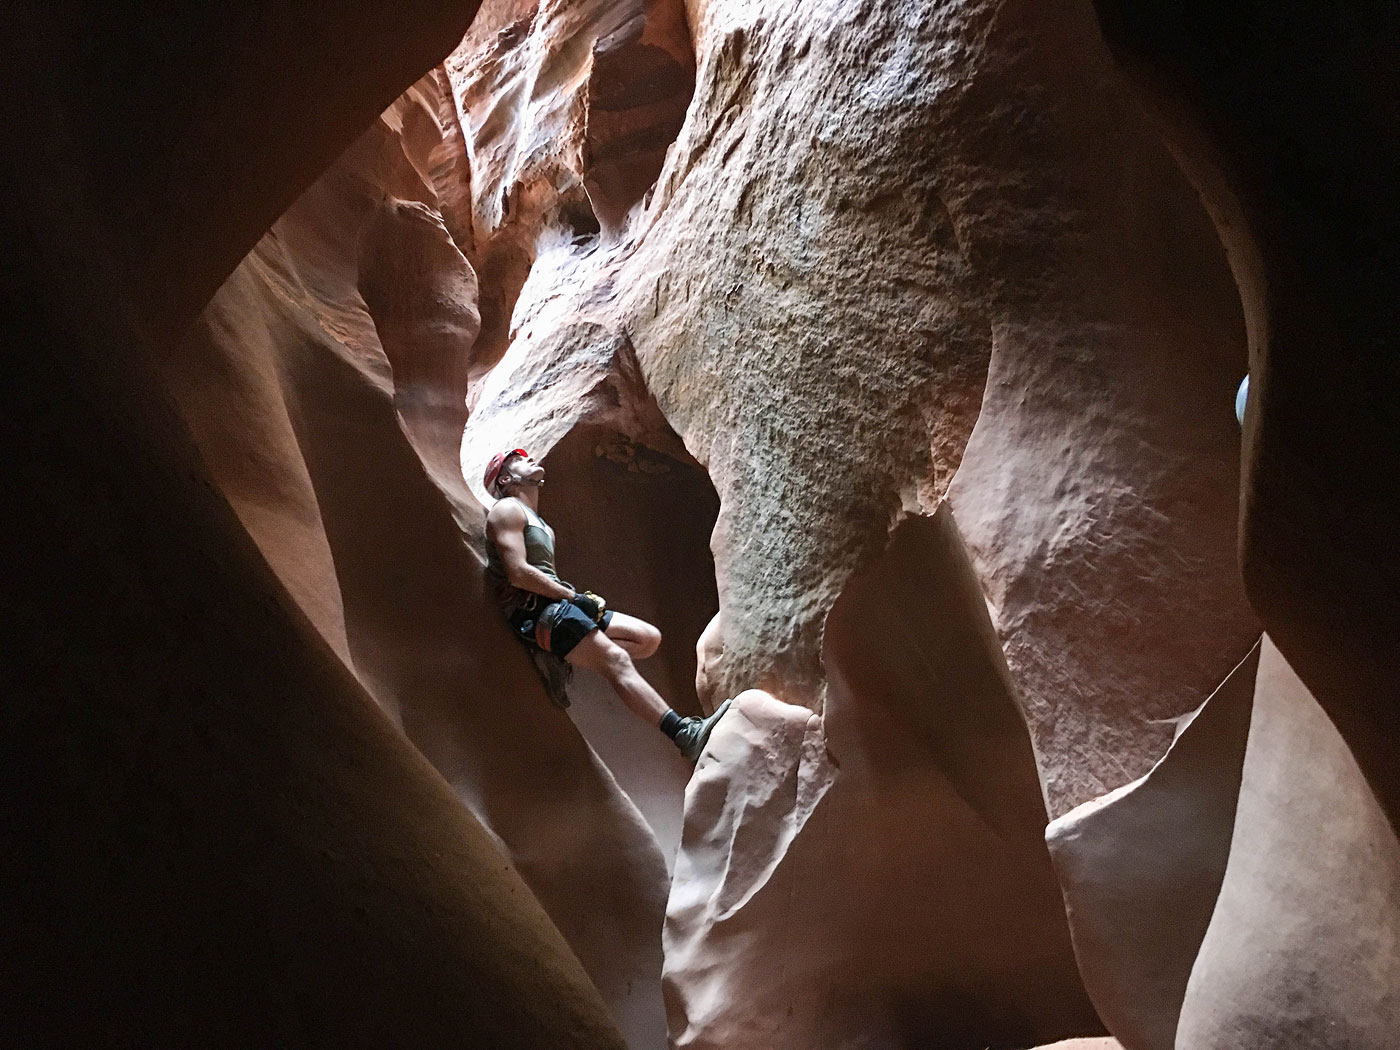 Canyoneer Lower Brimstone Gulch in Grand Staircase - Escalante National Monument, Utah - Stav is Lost